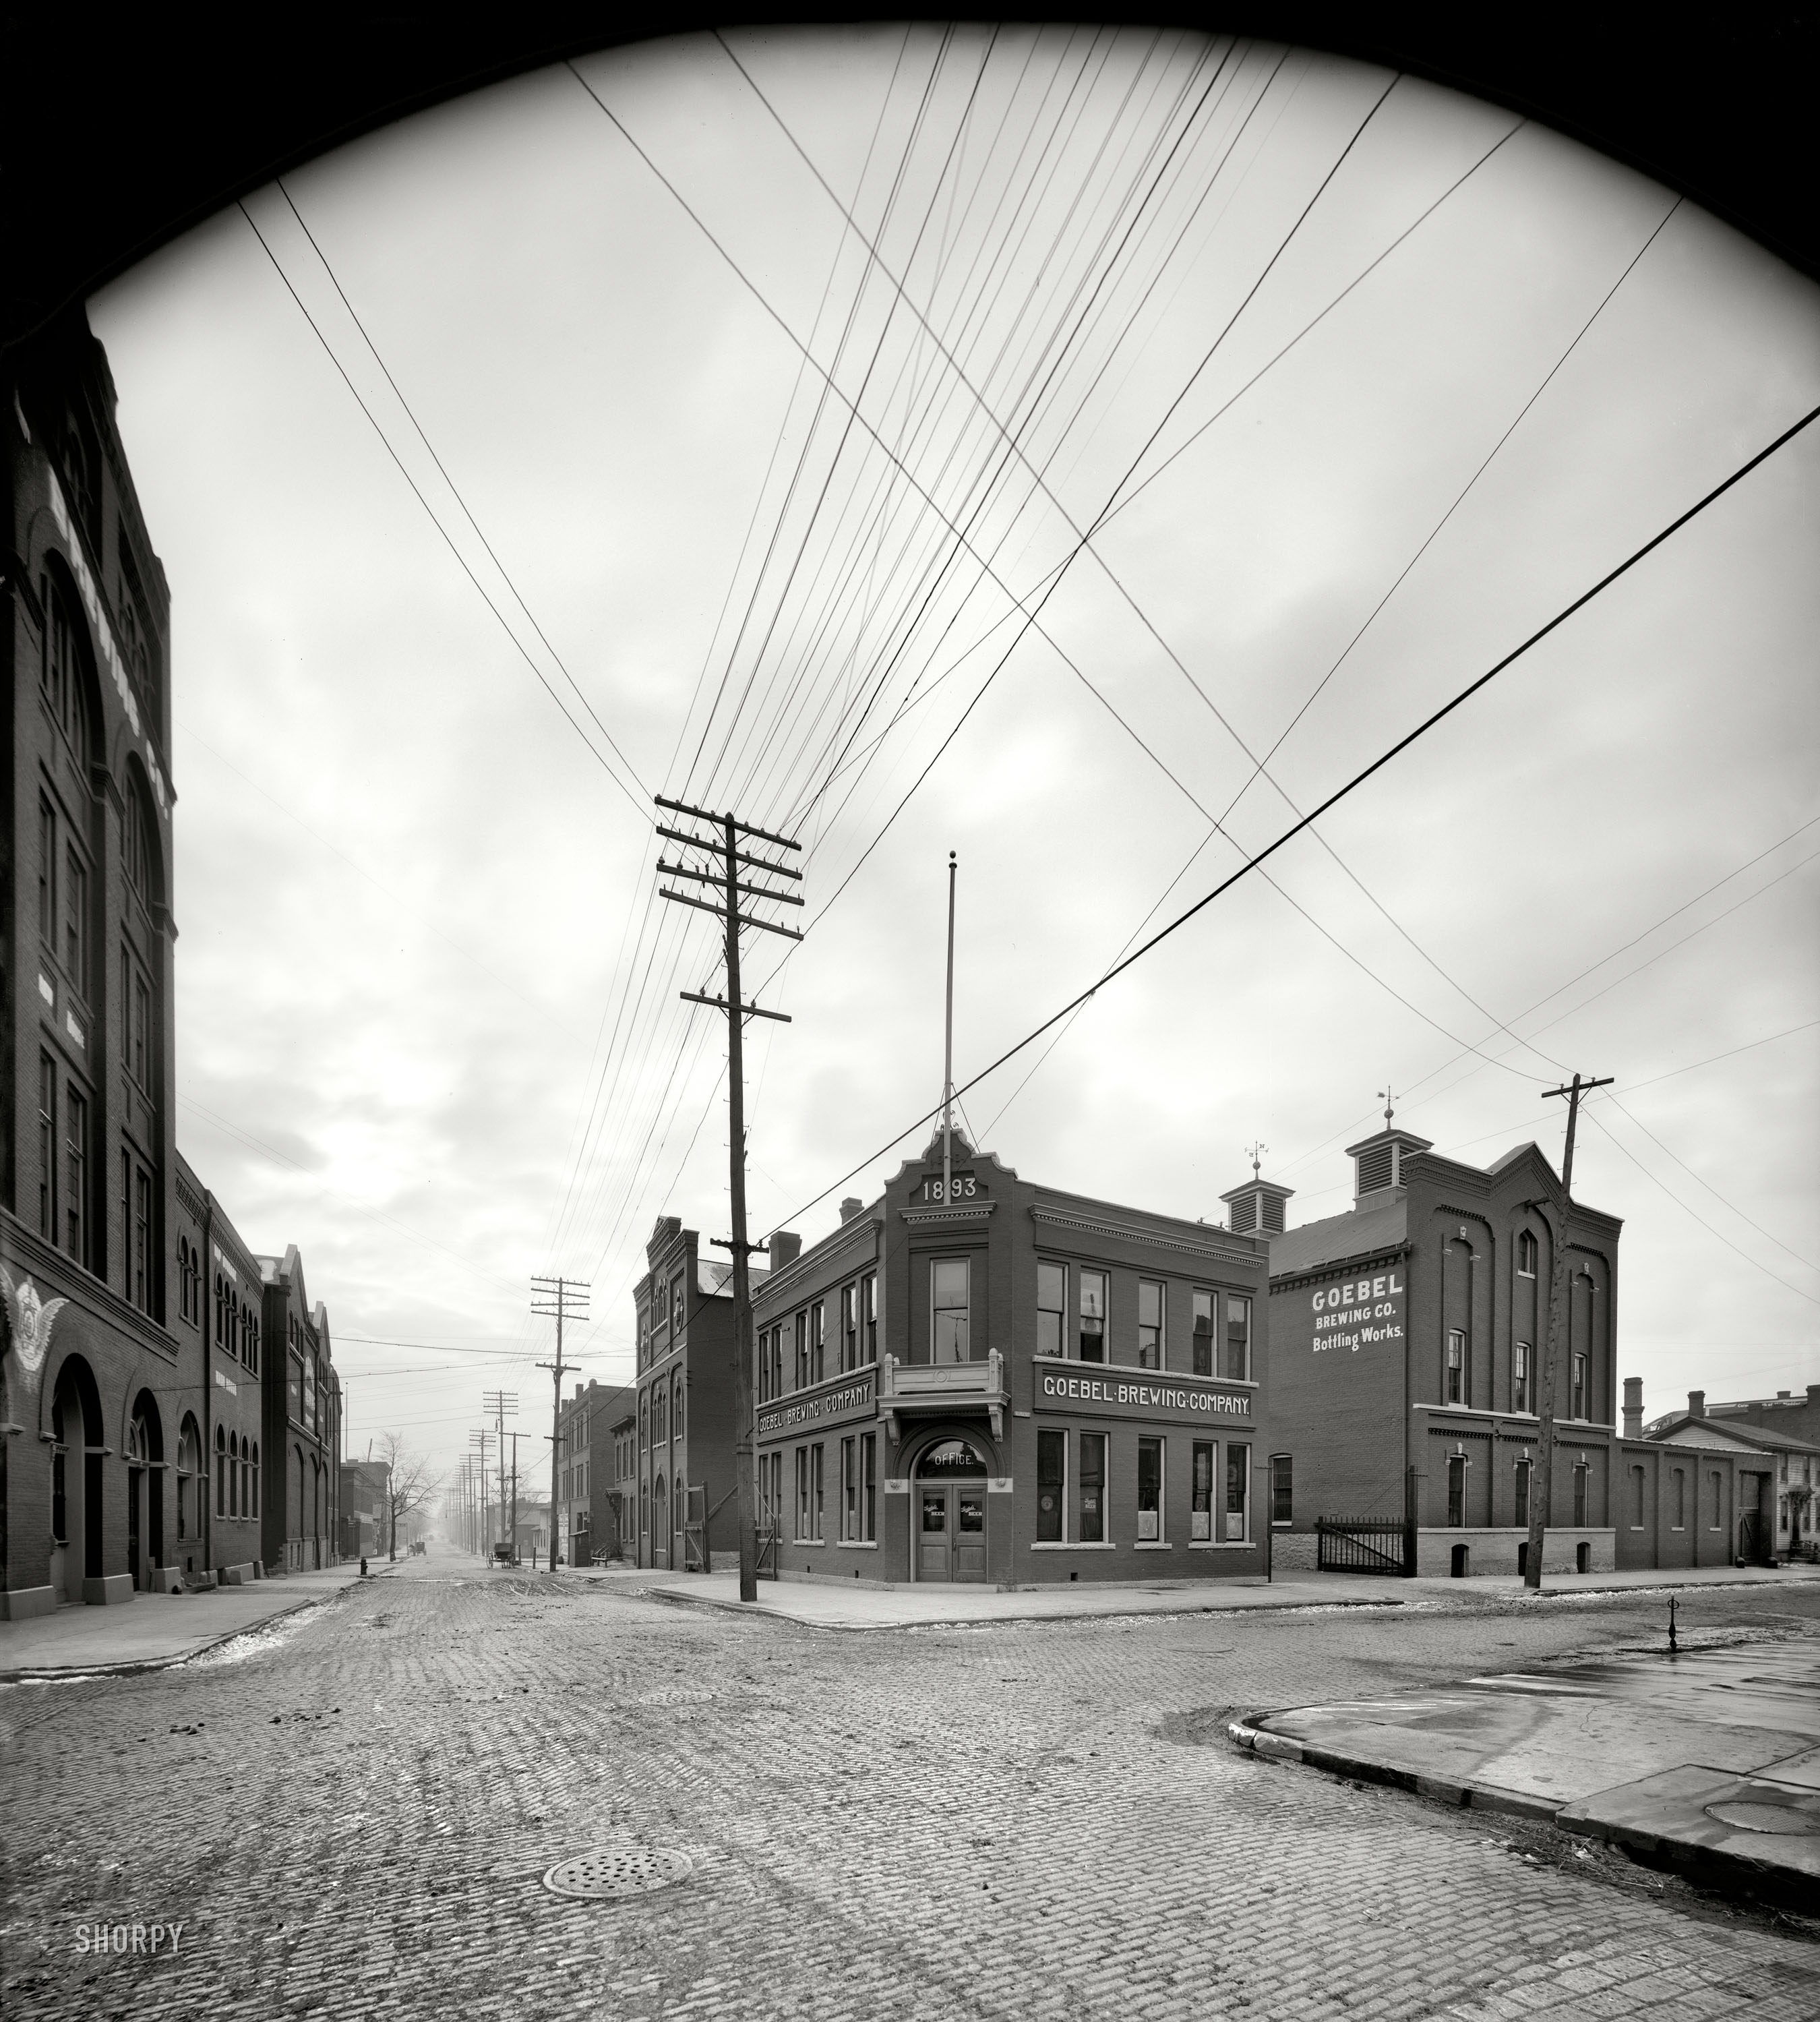 Detroit, Michigan, circa 1905. "Goebel Brewing Co., bottling works." Our third look at the brewery at Rivard and Maple streets. 8x10 inch glass negative. View full size.